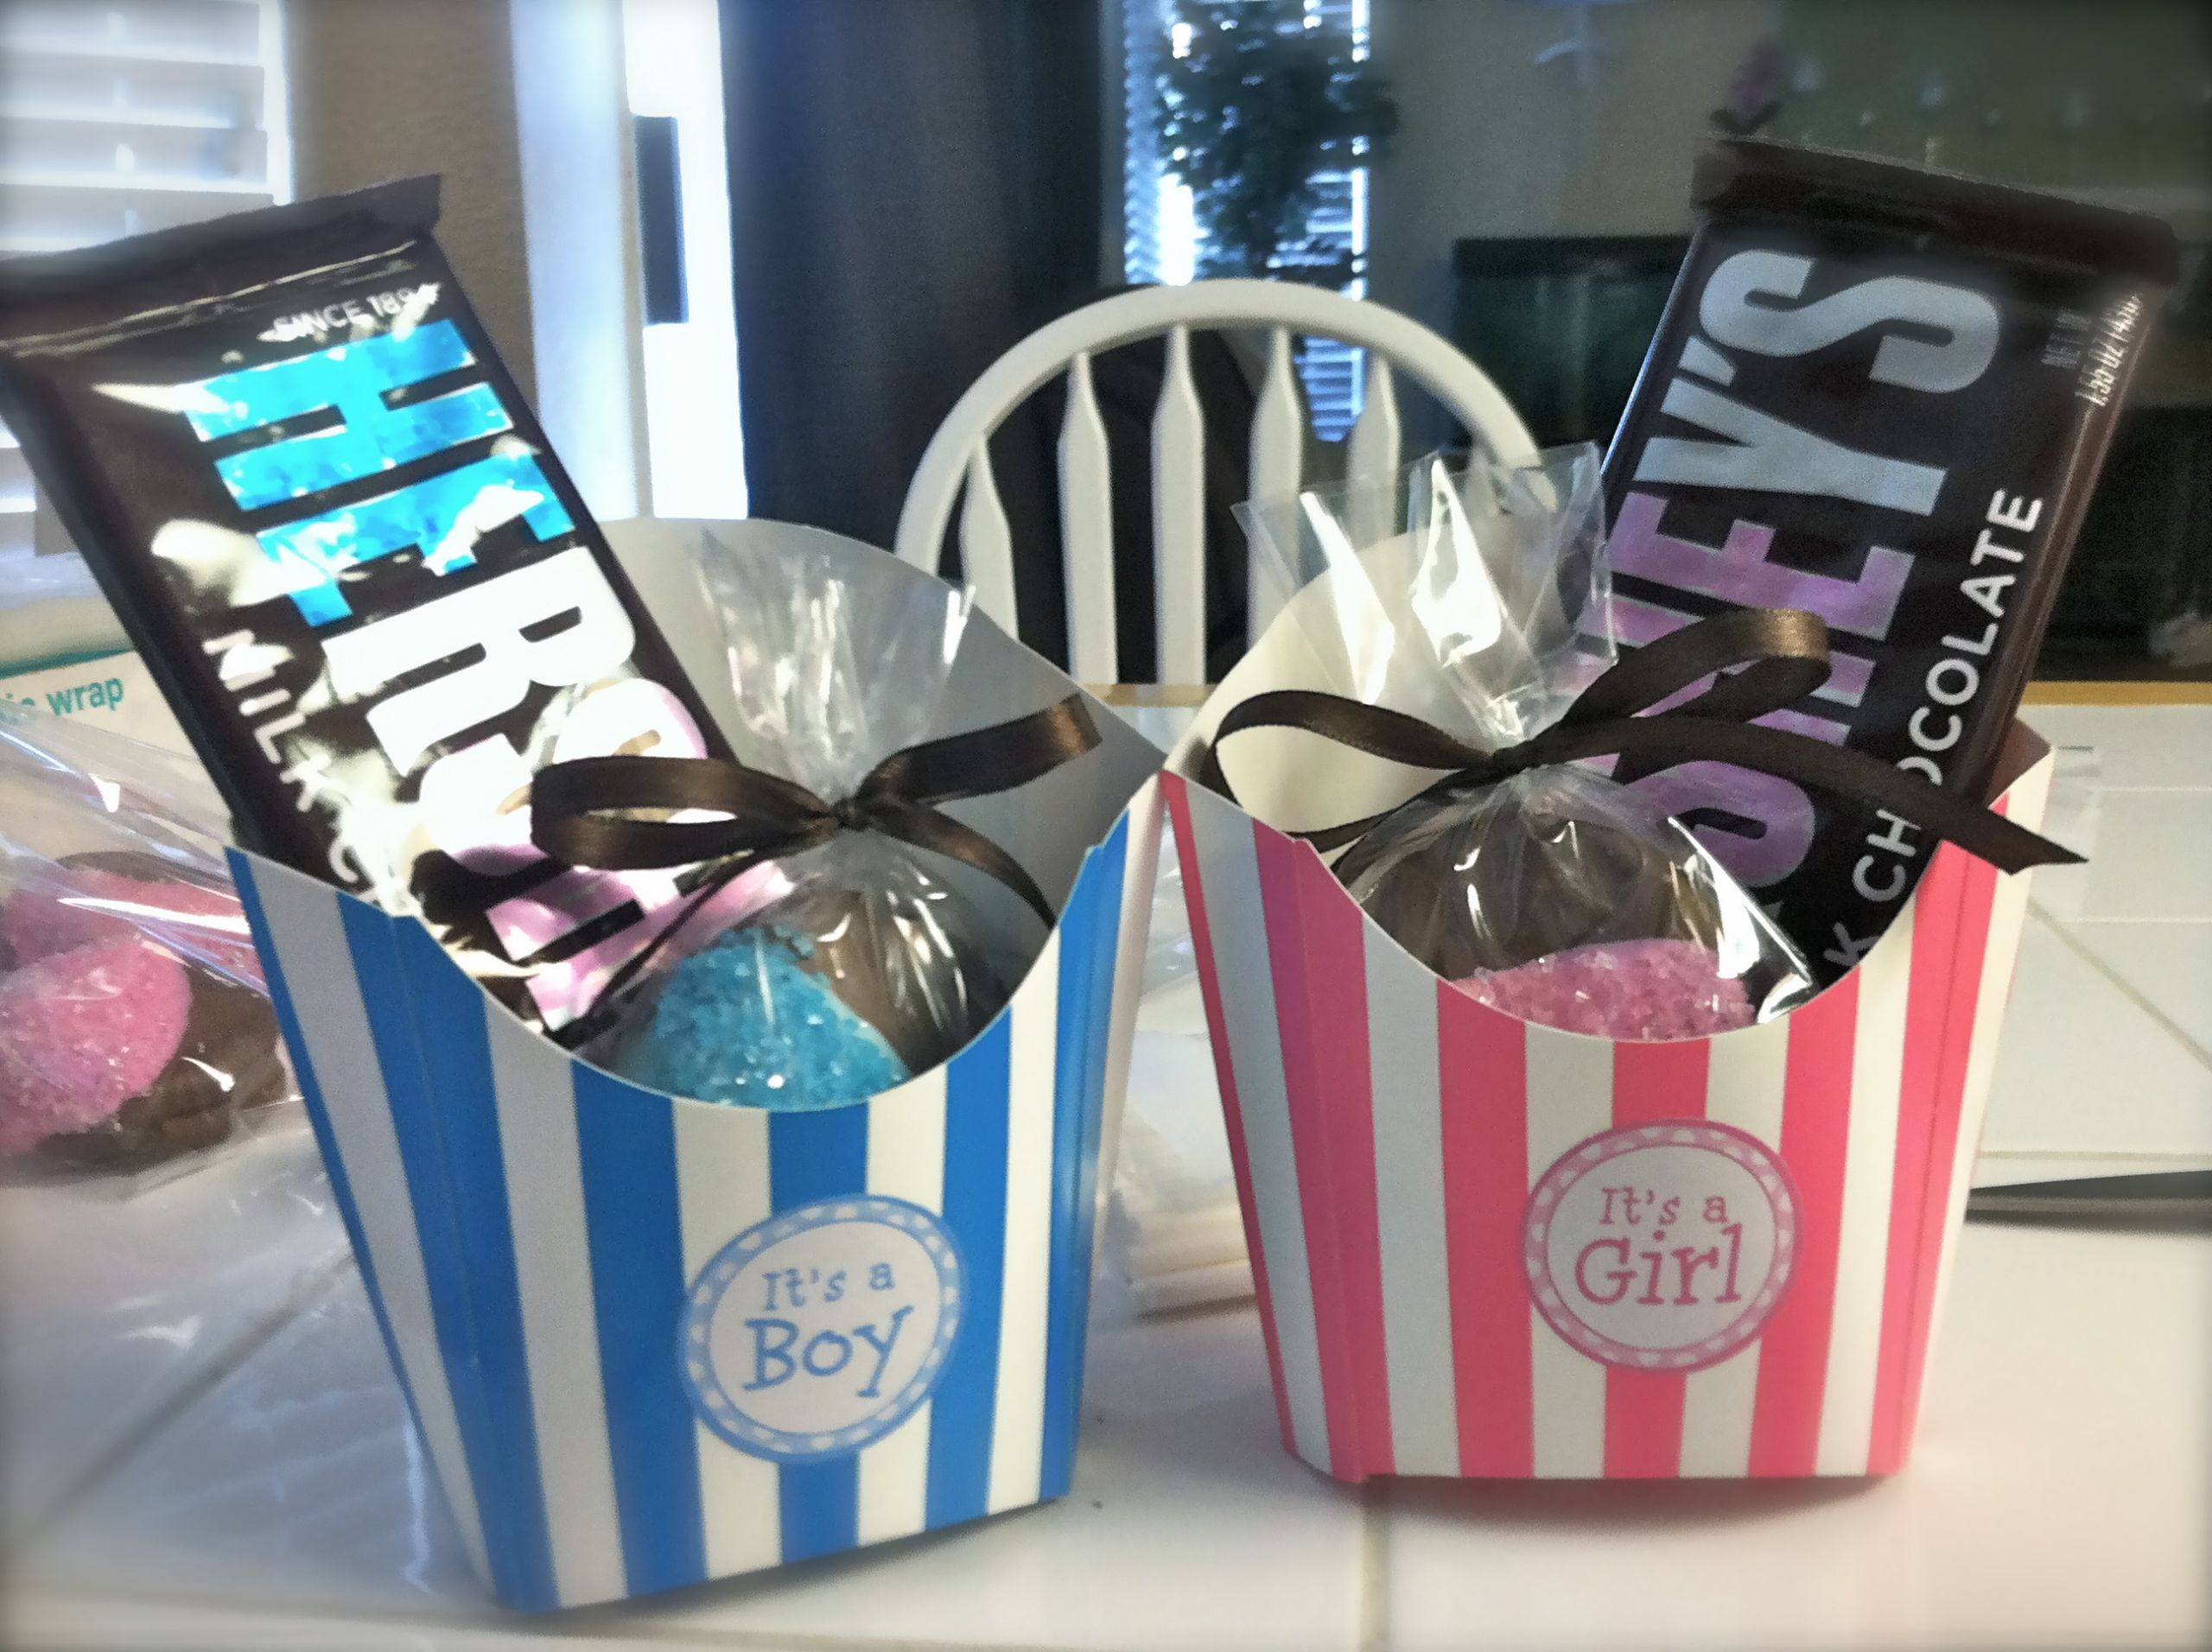 Gift Ideas For Gender Reveal Party
 Our Gender Reveal Party